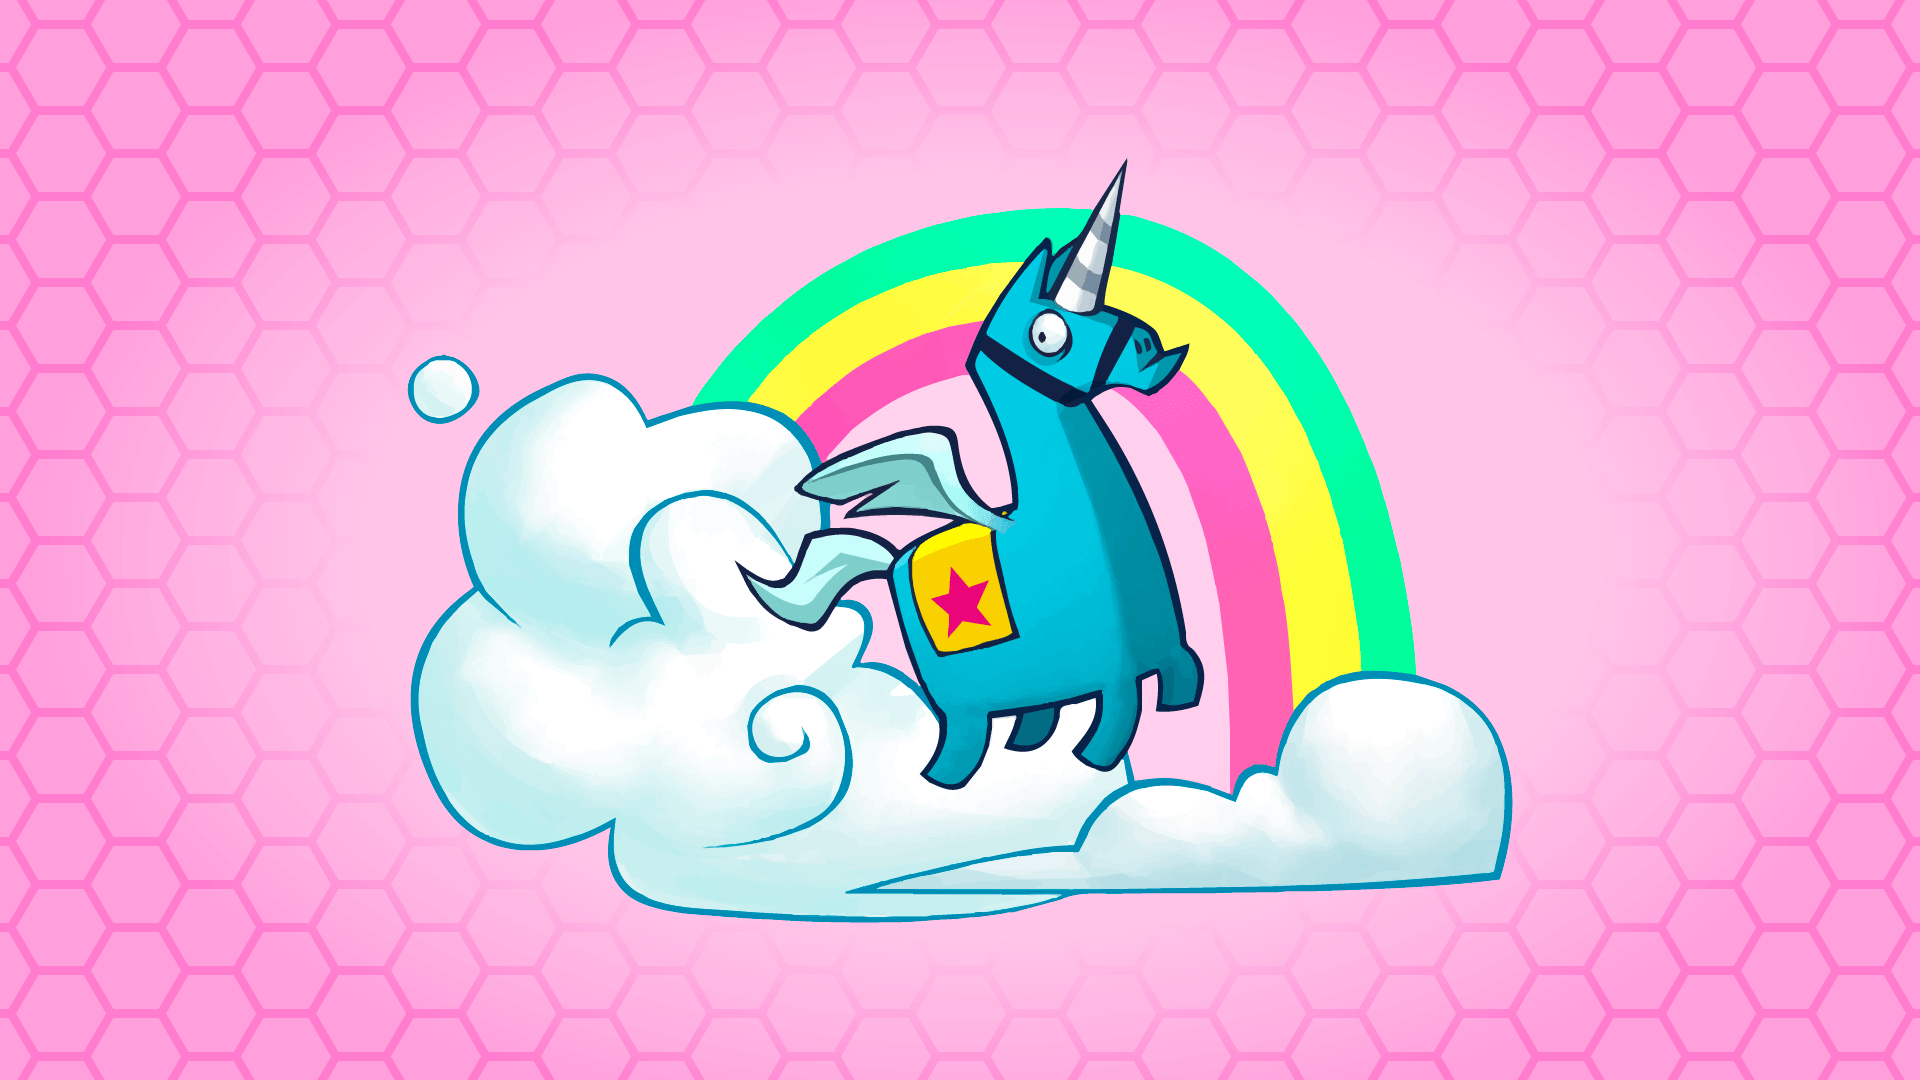 A blue dragon with a horn and wings, flying through the clouds with a bag of gold. - Unicorn